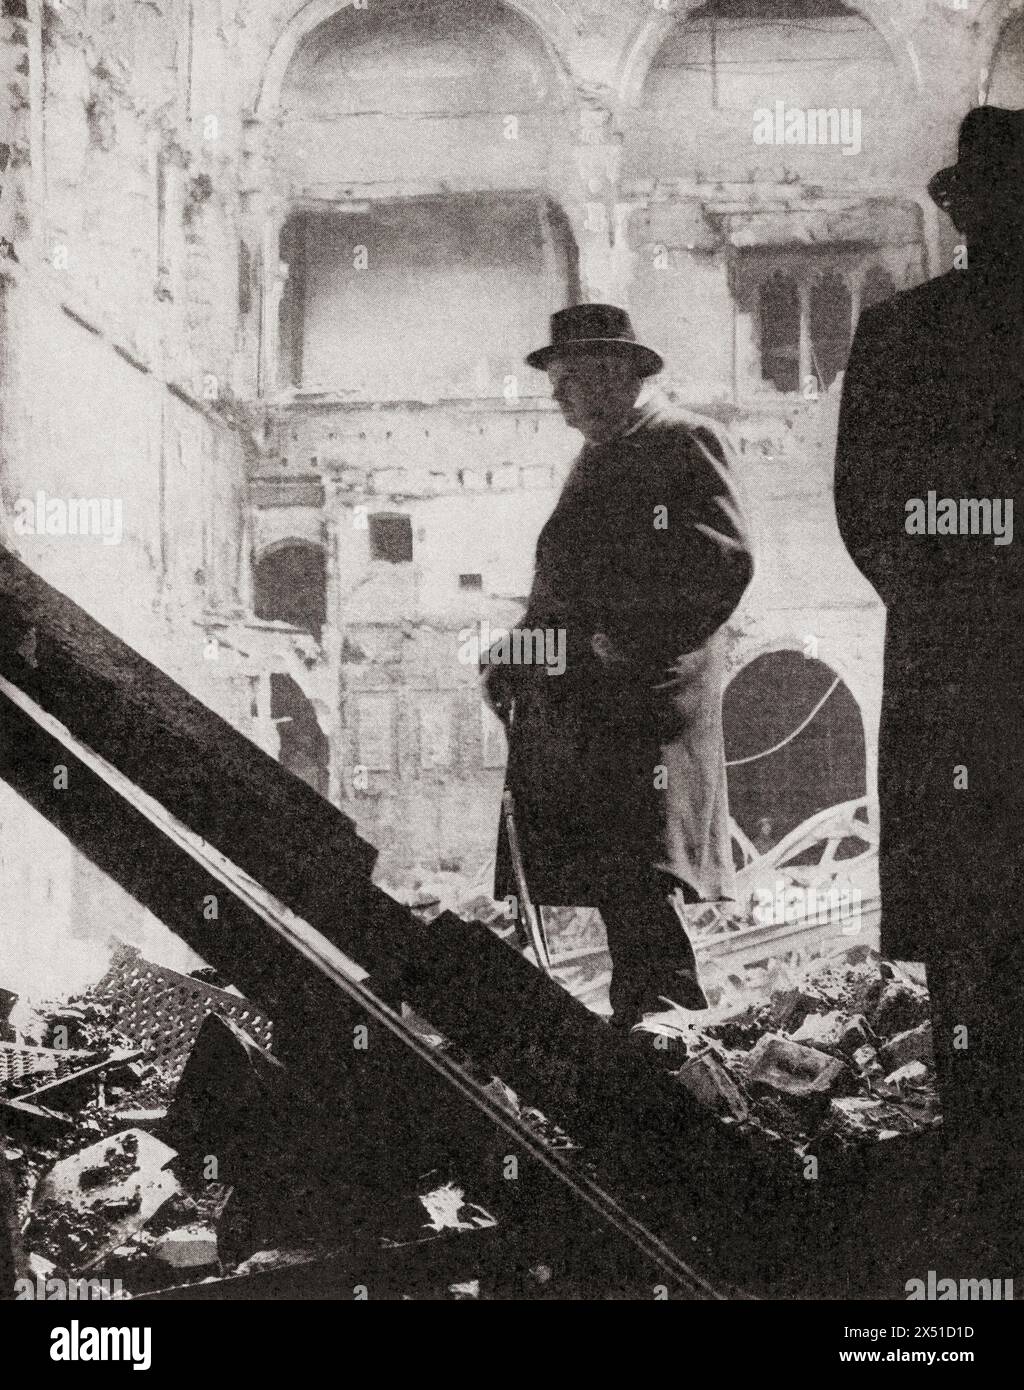 Winston Churchill inspects the ruins of part of the Houses of Parliament after London's severest air raid by German bombers, 10-11 May, 1941.  Sir Winston Leonard Spencer-Churchill, 1874 – 1965. British politician, army officer, writer and twice Prime Minister of the United Kingdom.  From The War in Pictures, Second Year. Stock Photo